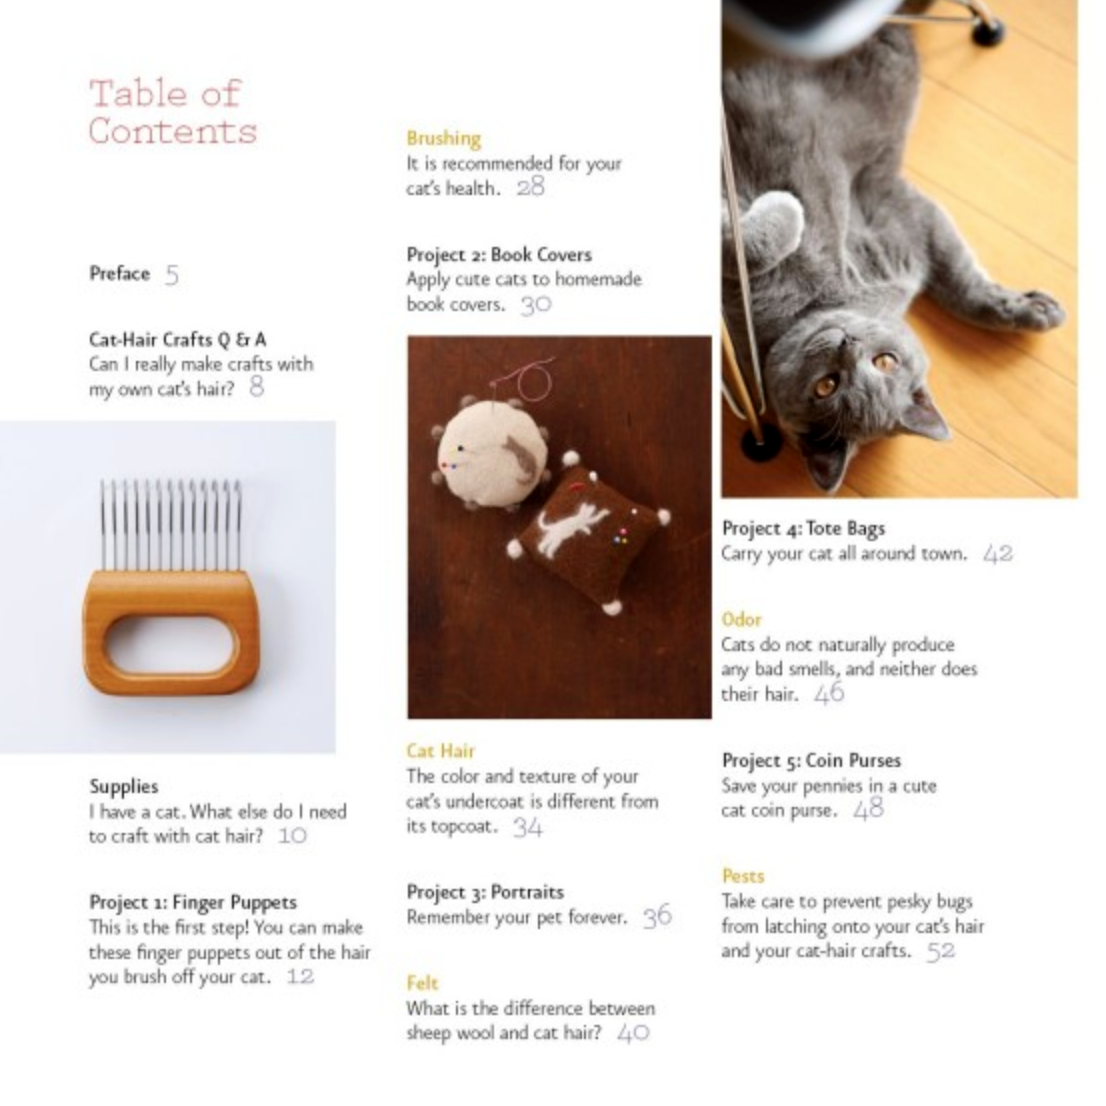 Crafting with Cat Hair : Cute Handicrafts to Make With Your Cat